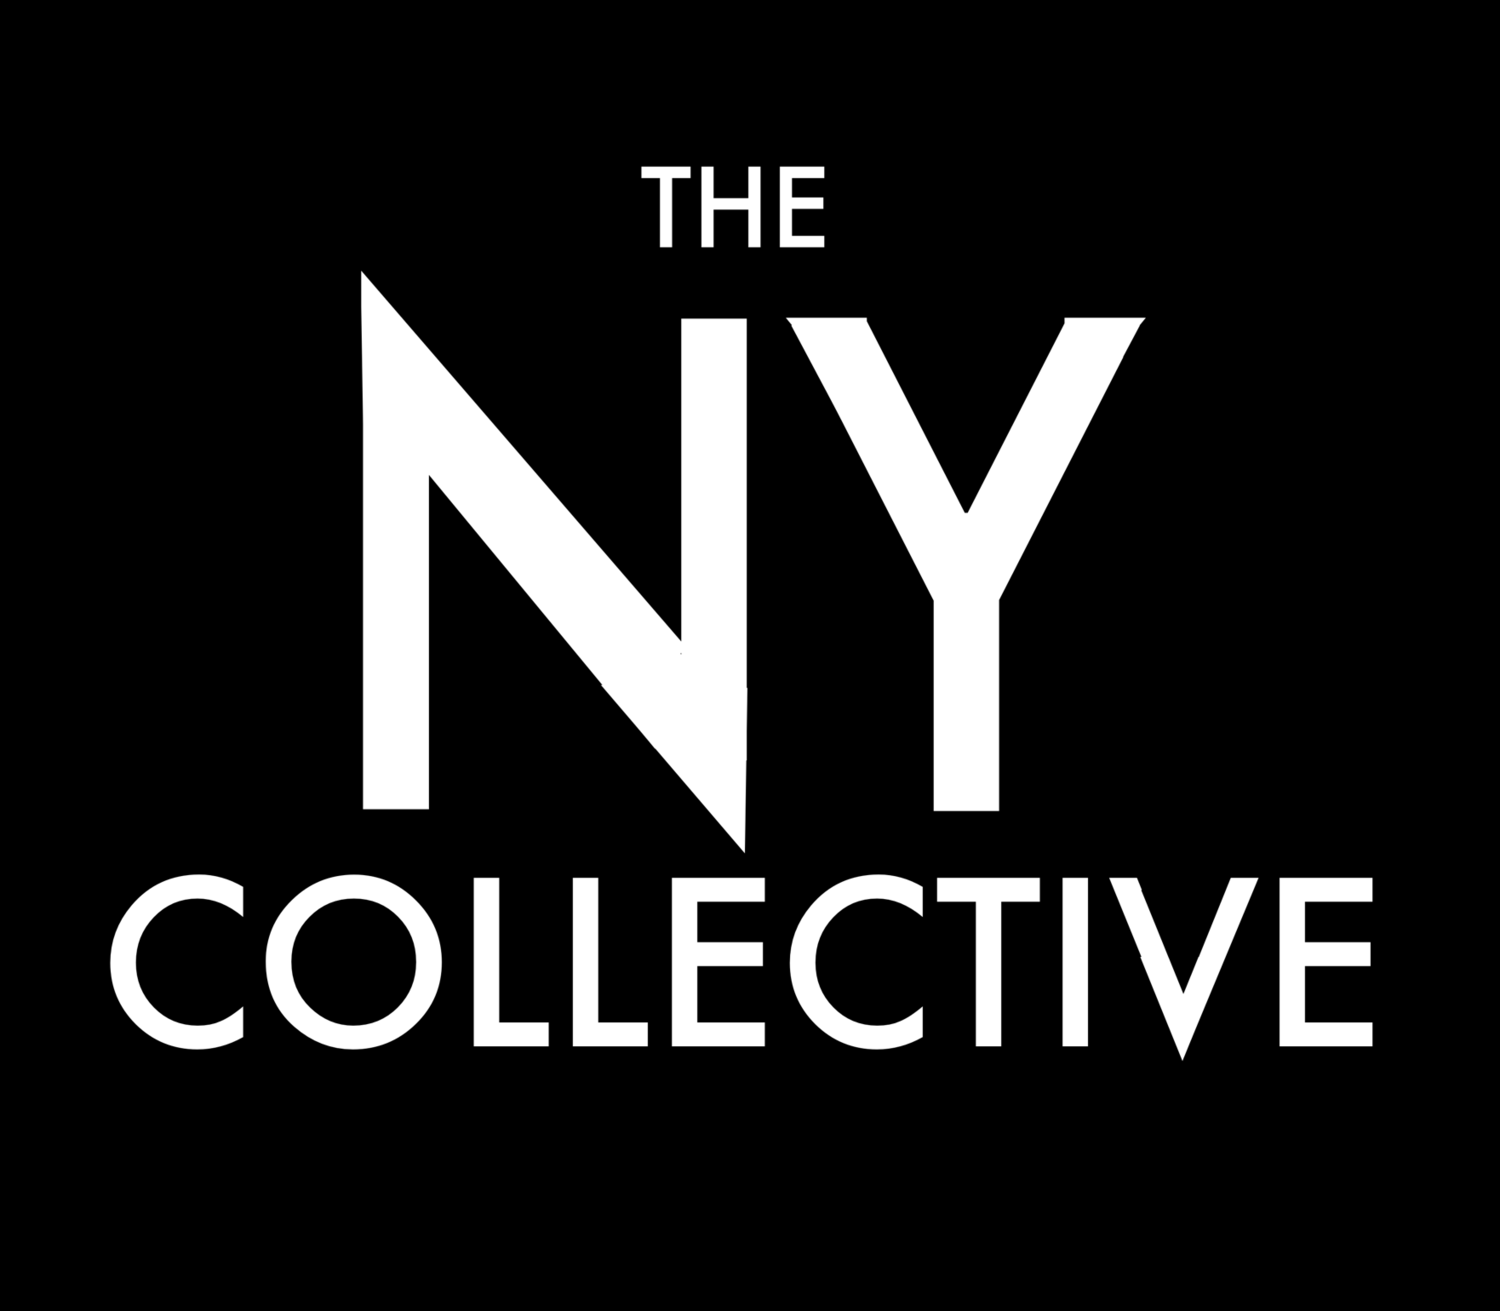 The NY Collective